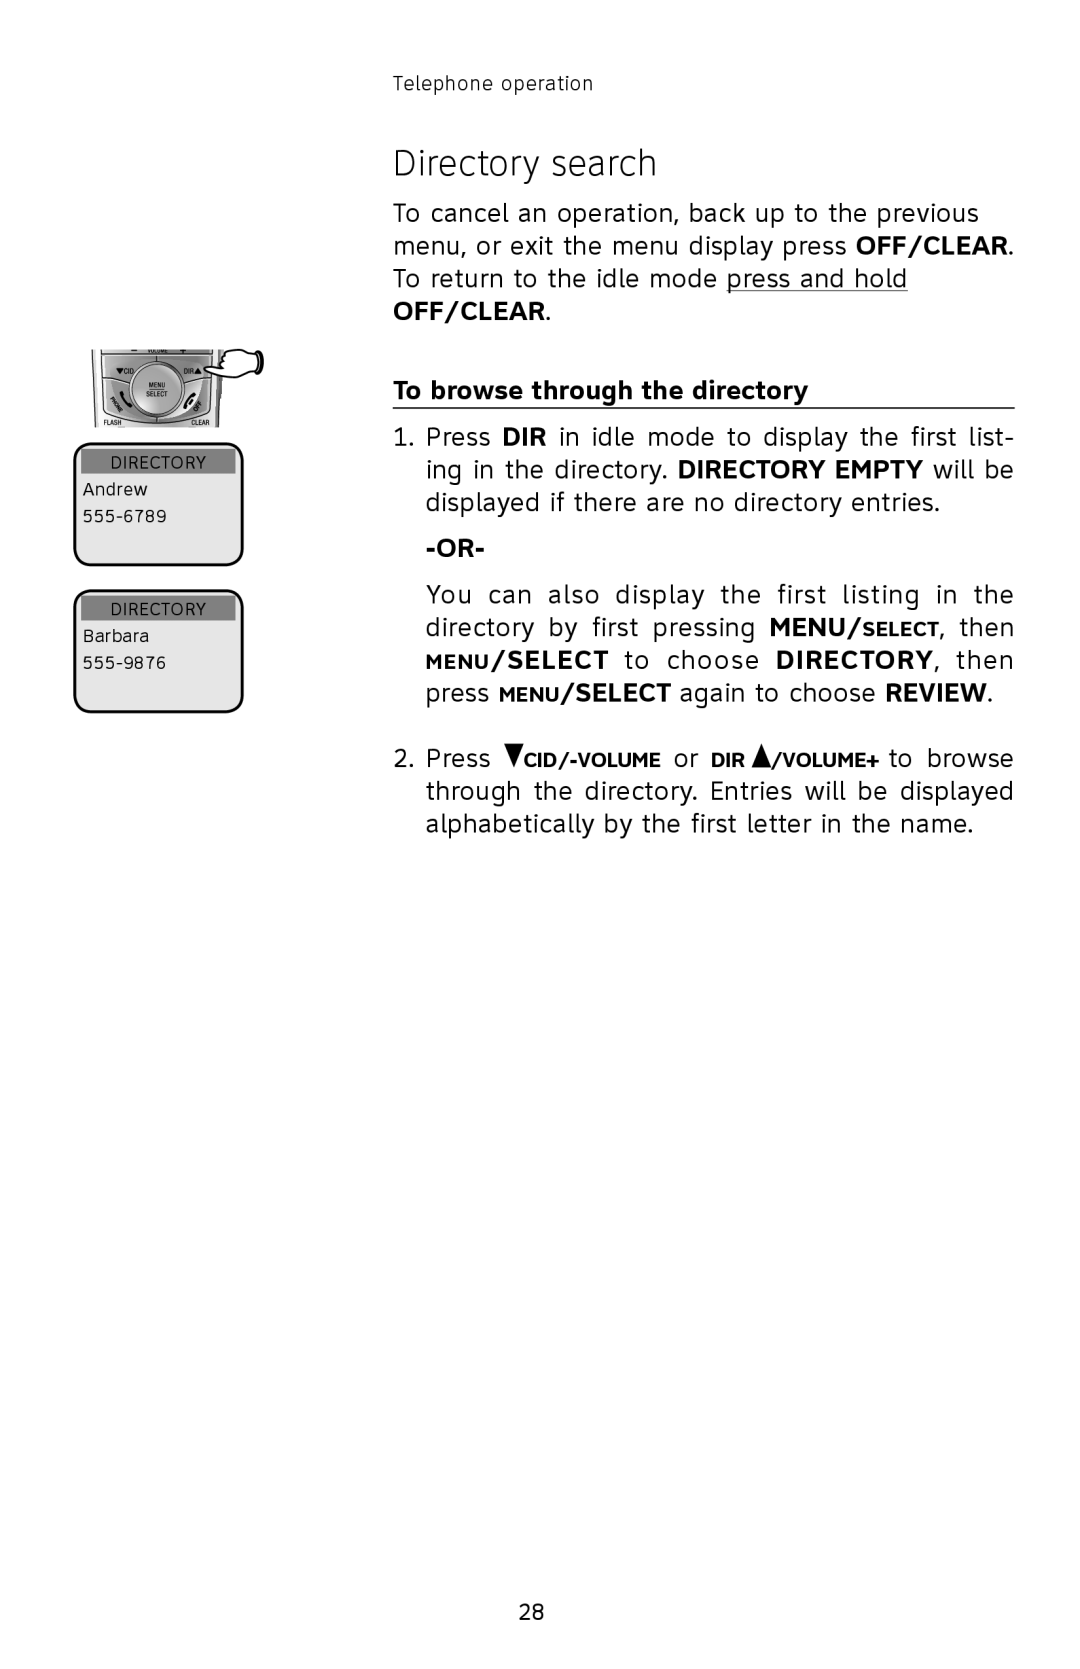 AT&T E2912 user manual Directory search, To browse through the directory, DIRECTORY Andrew DIRECTORY Barbara 